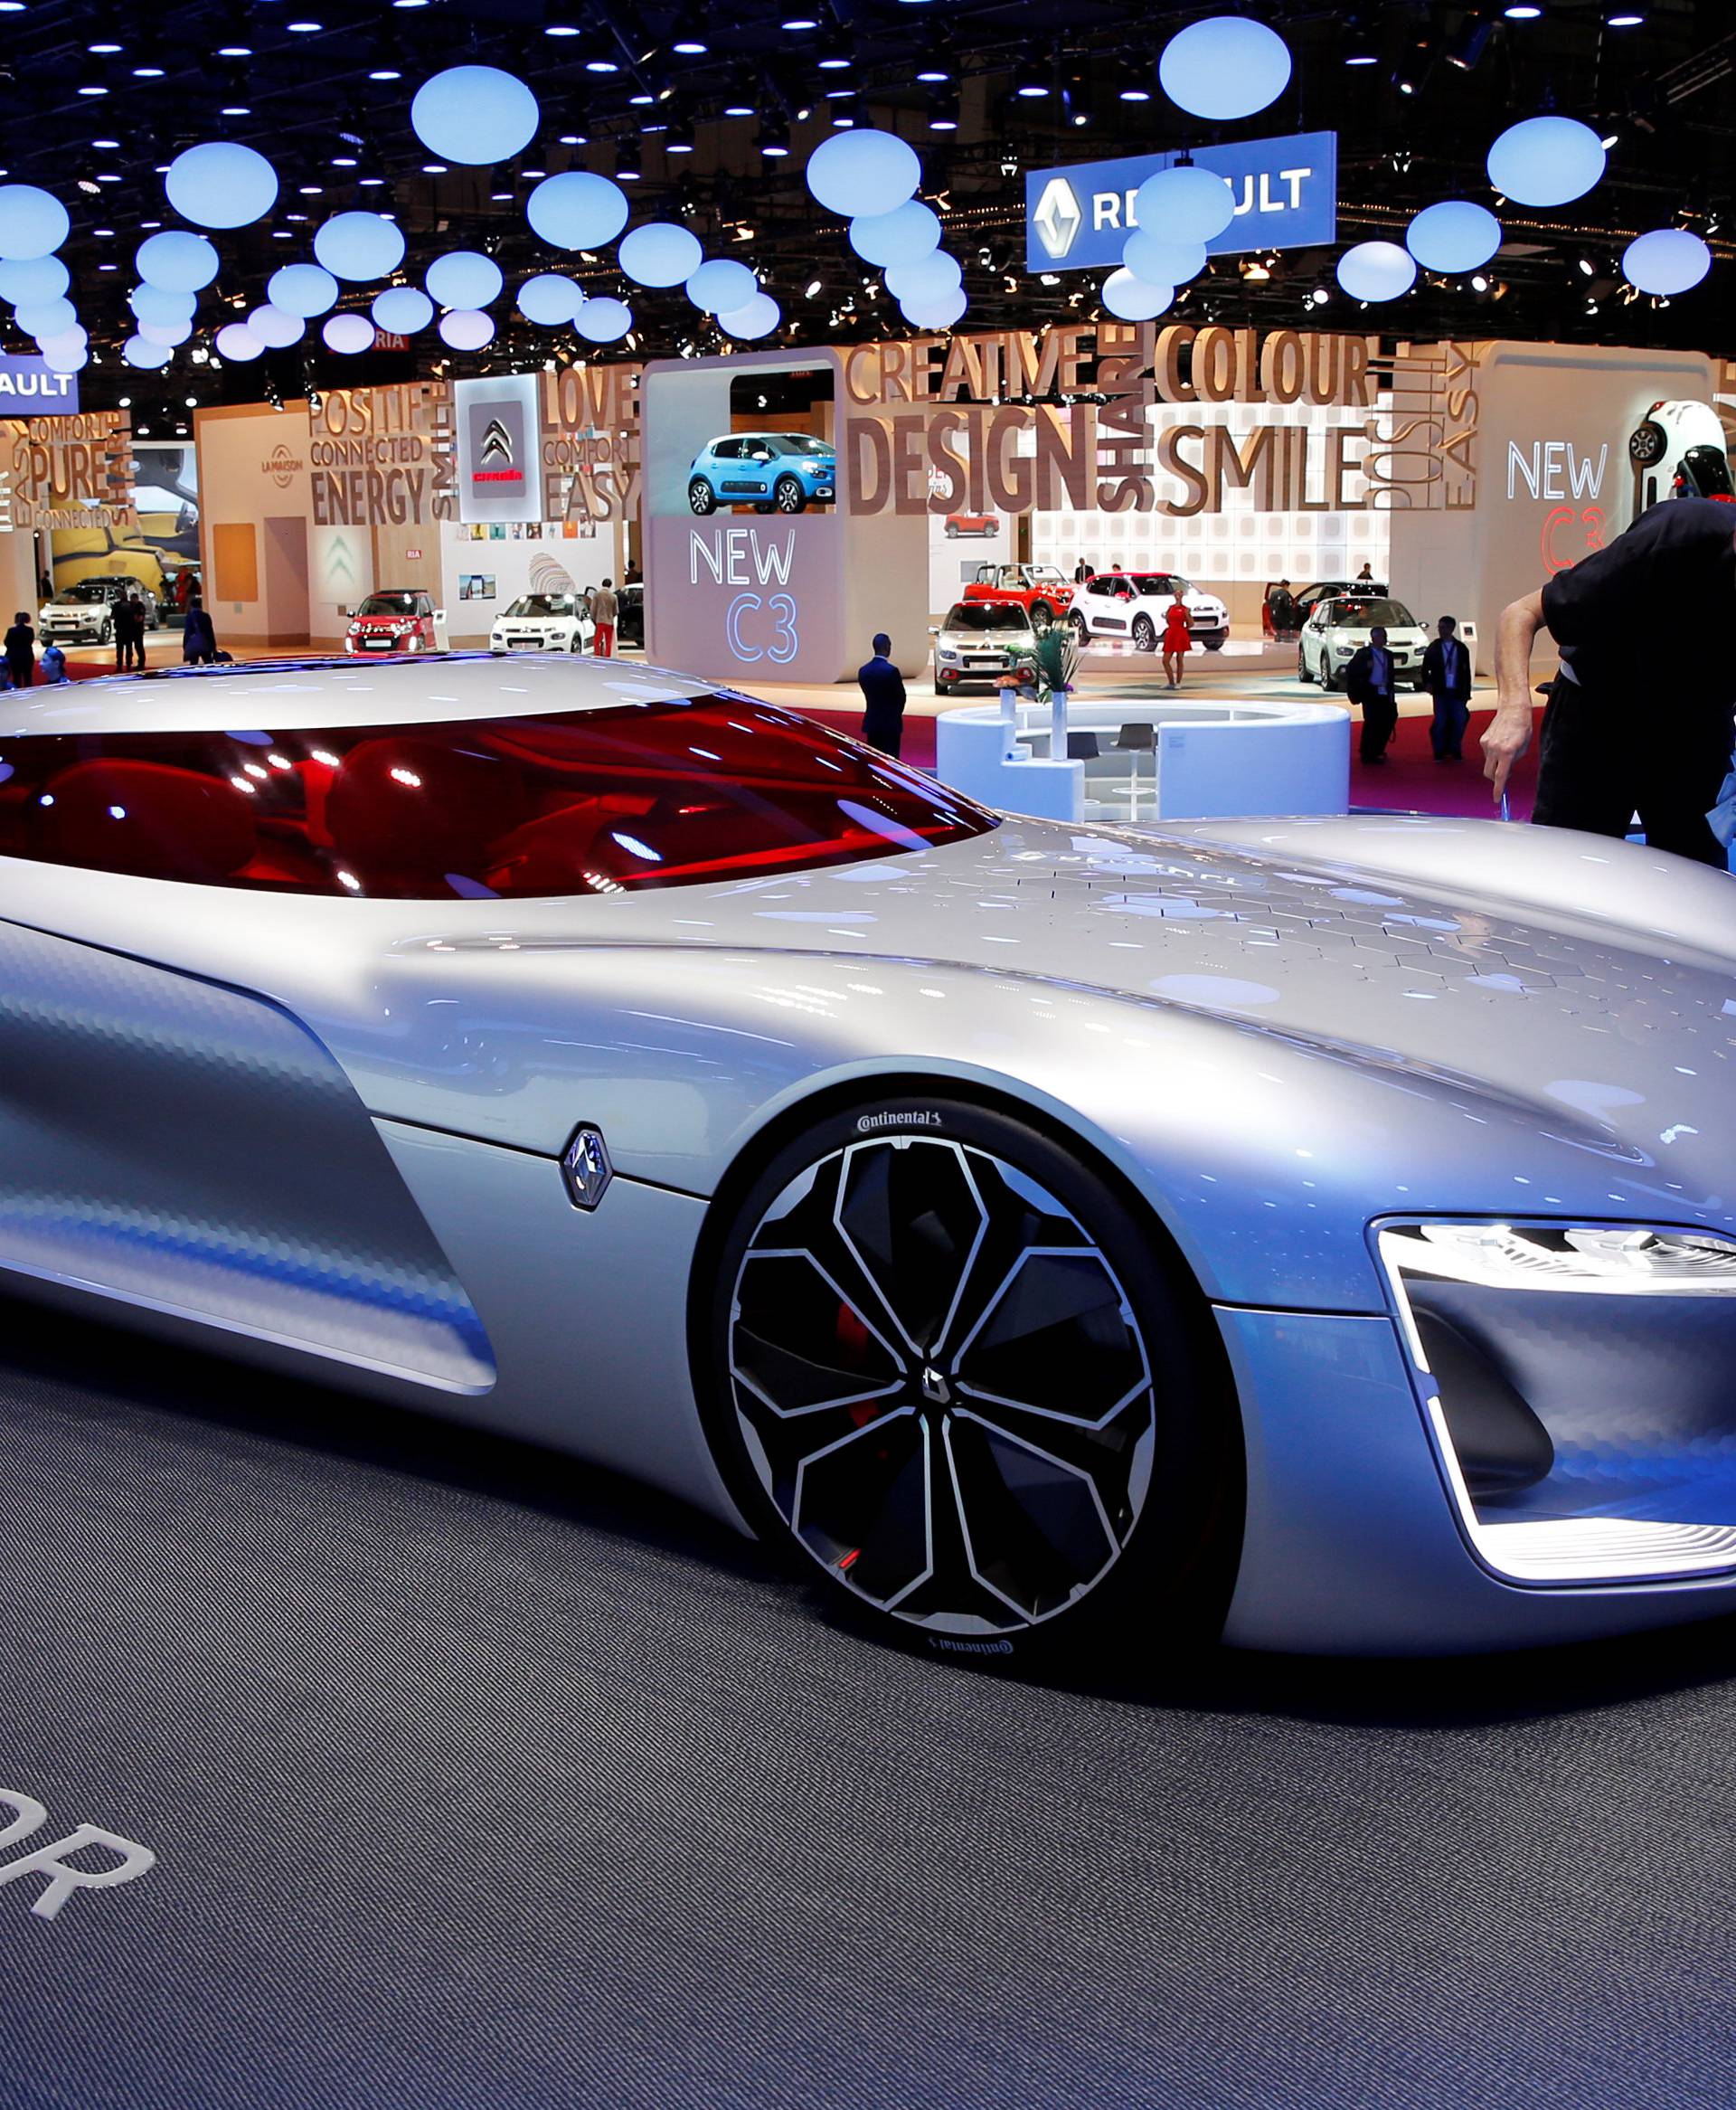 The concept car Renault Trezor is displayed on media day at the Paris auto show, in Paris